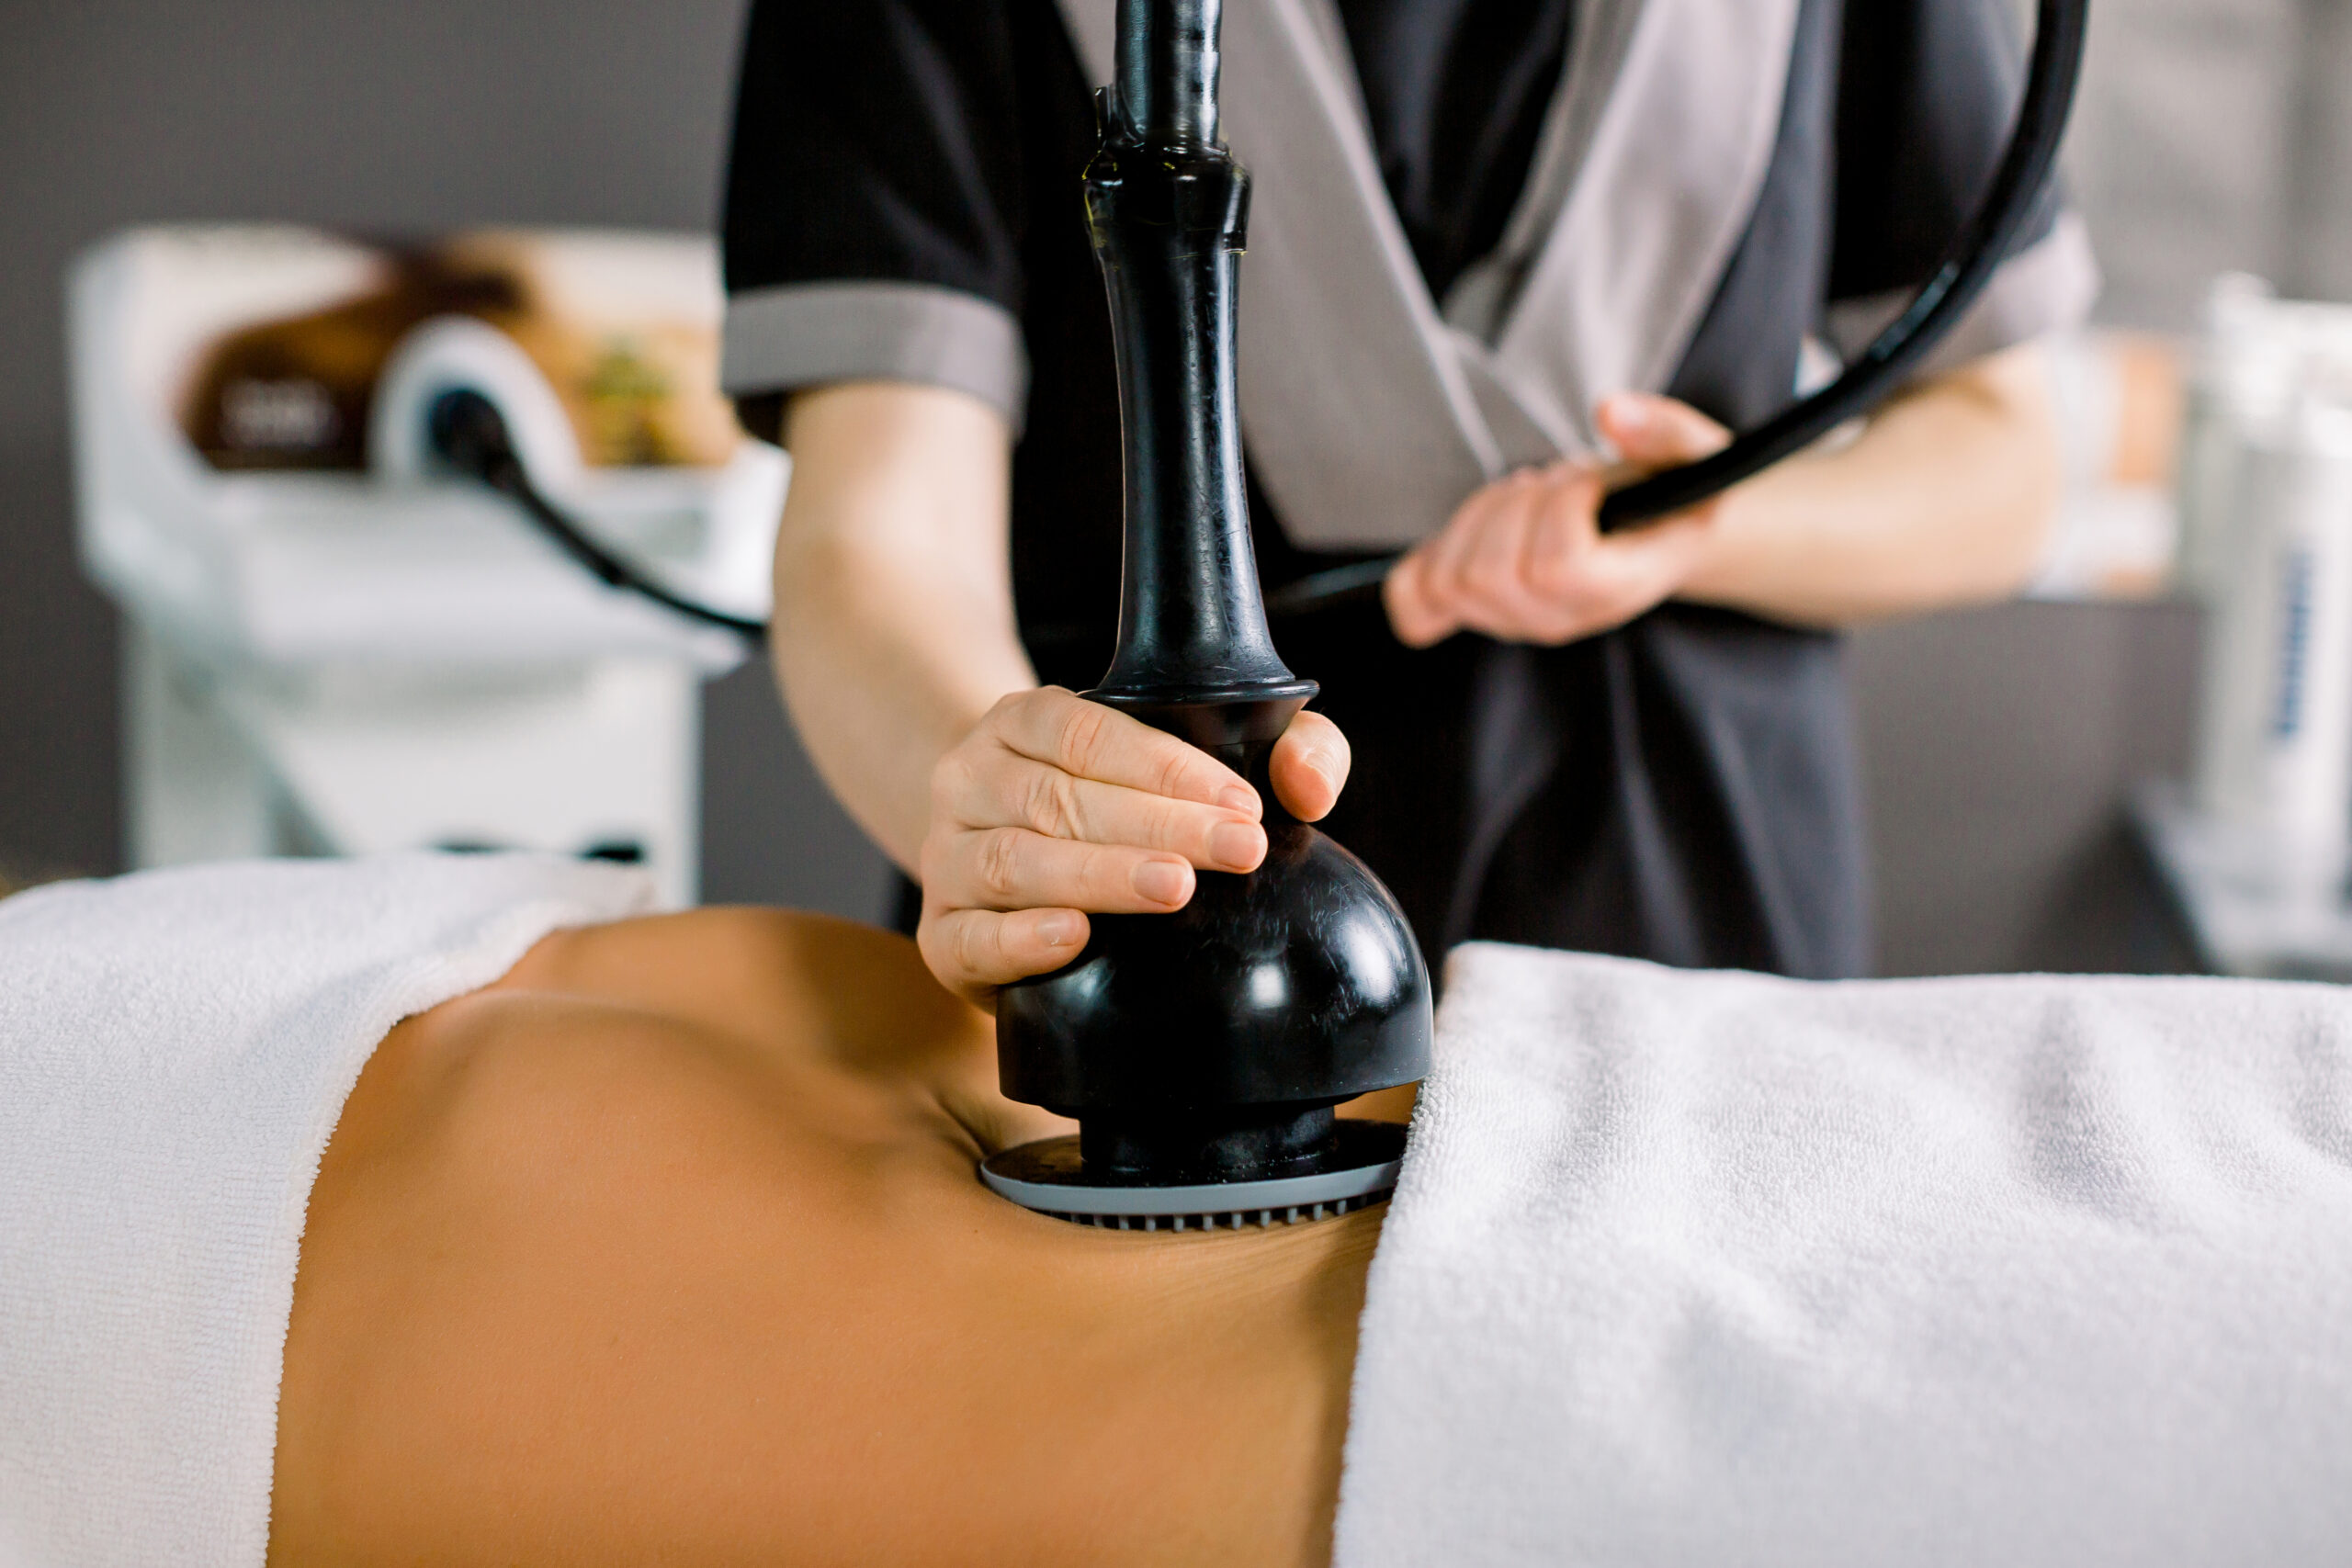 Vacuum massage device, anti cellulite body correction. Cropped image of woman client receiving vacuum massage of the abdomen and hands of female doctor holding the device.